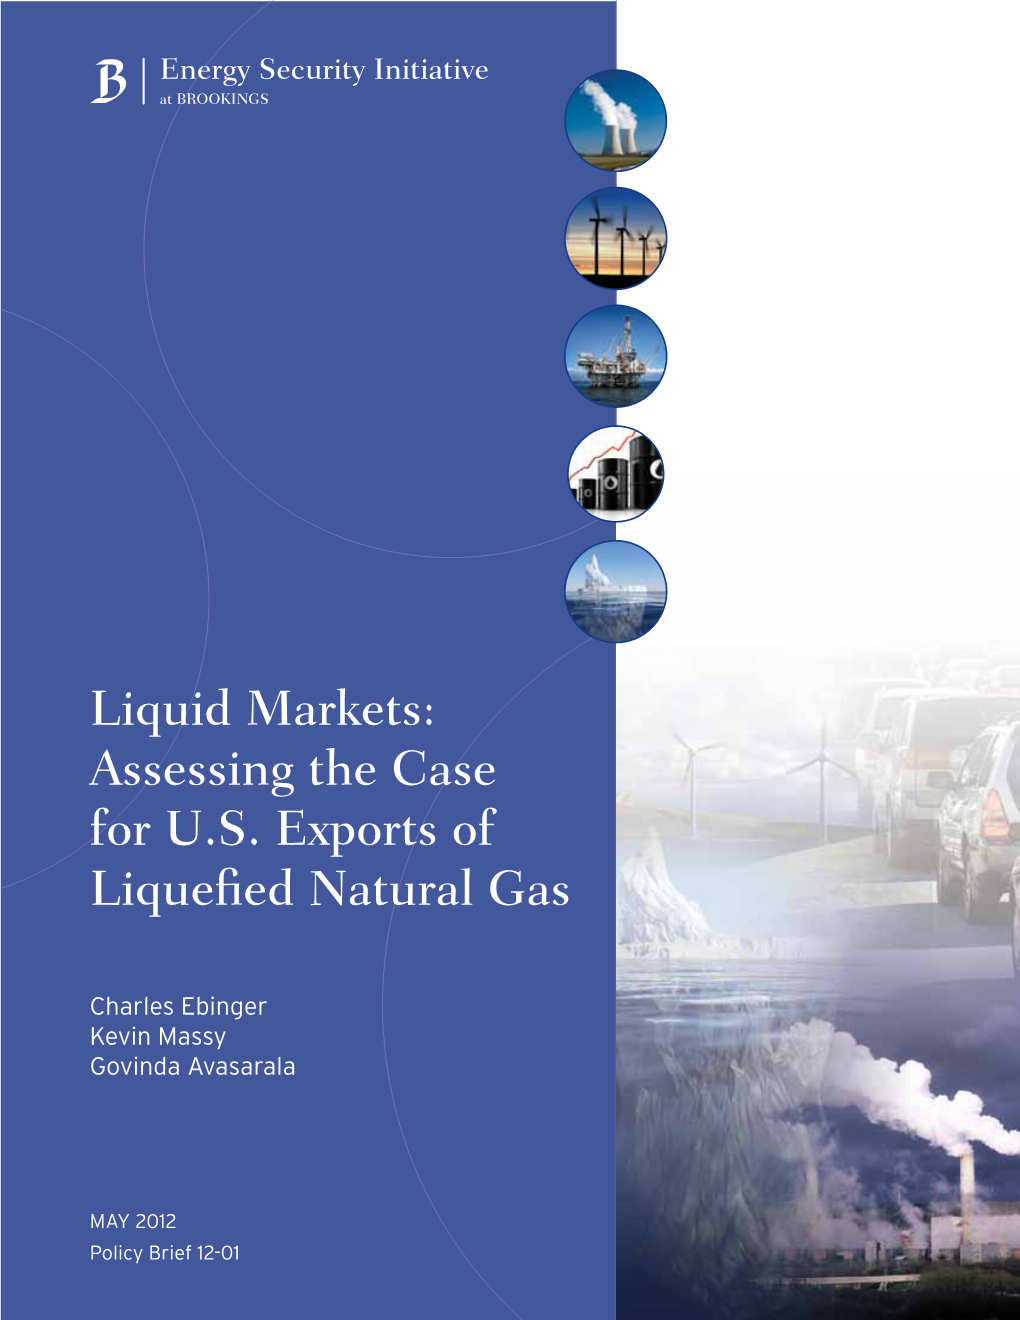 Assessing the Case for US Exports of Liquefied Natural